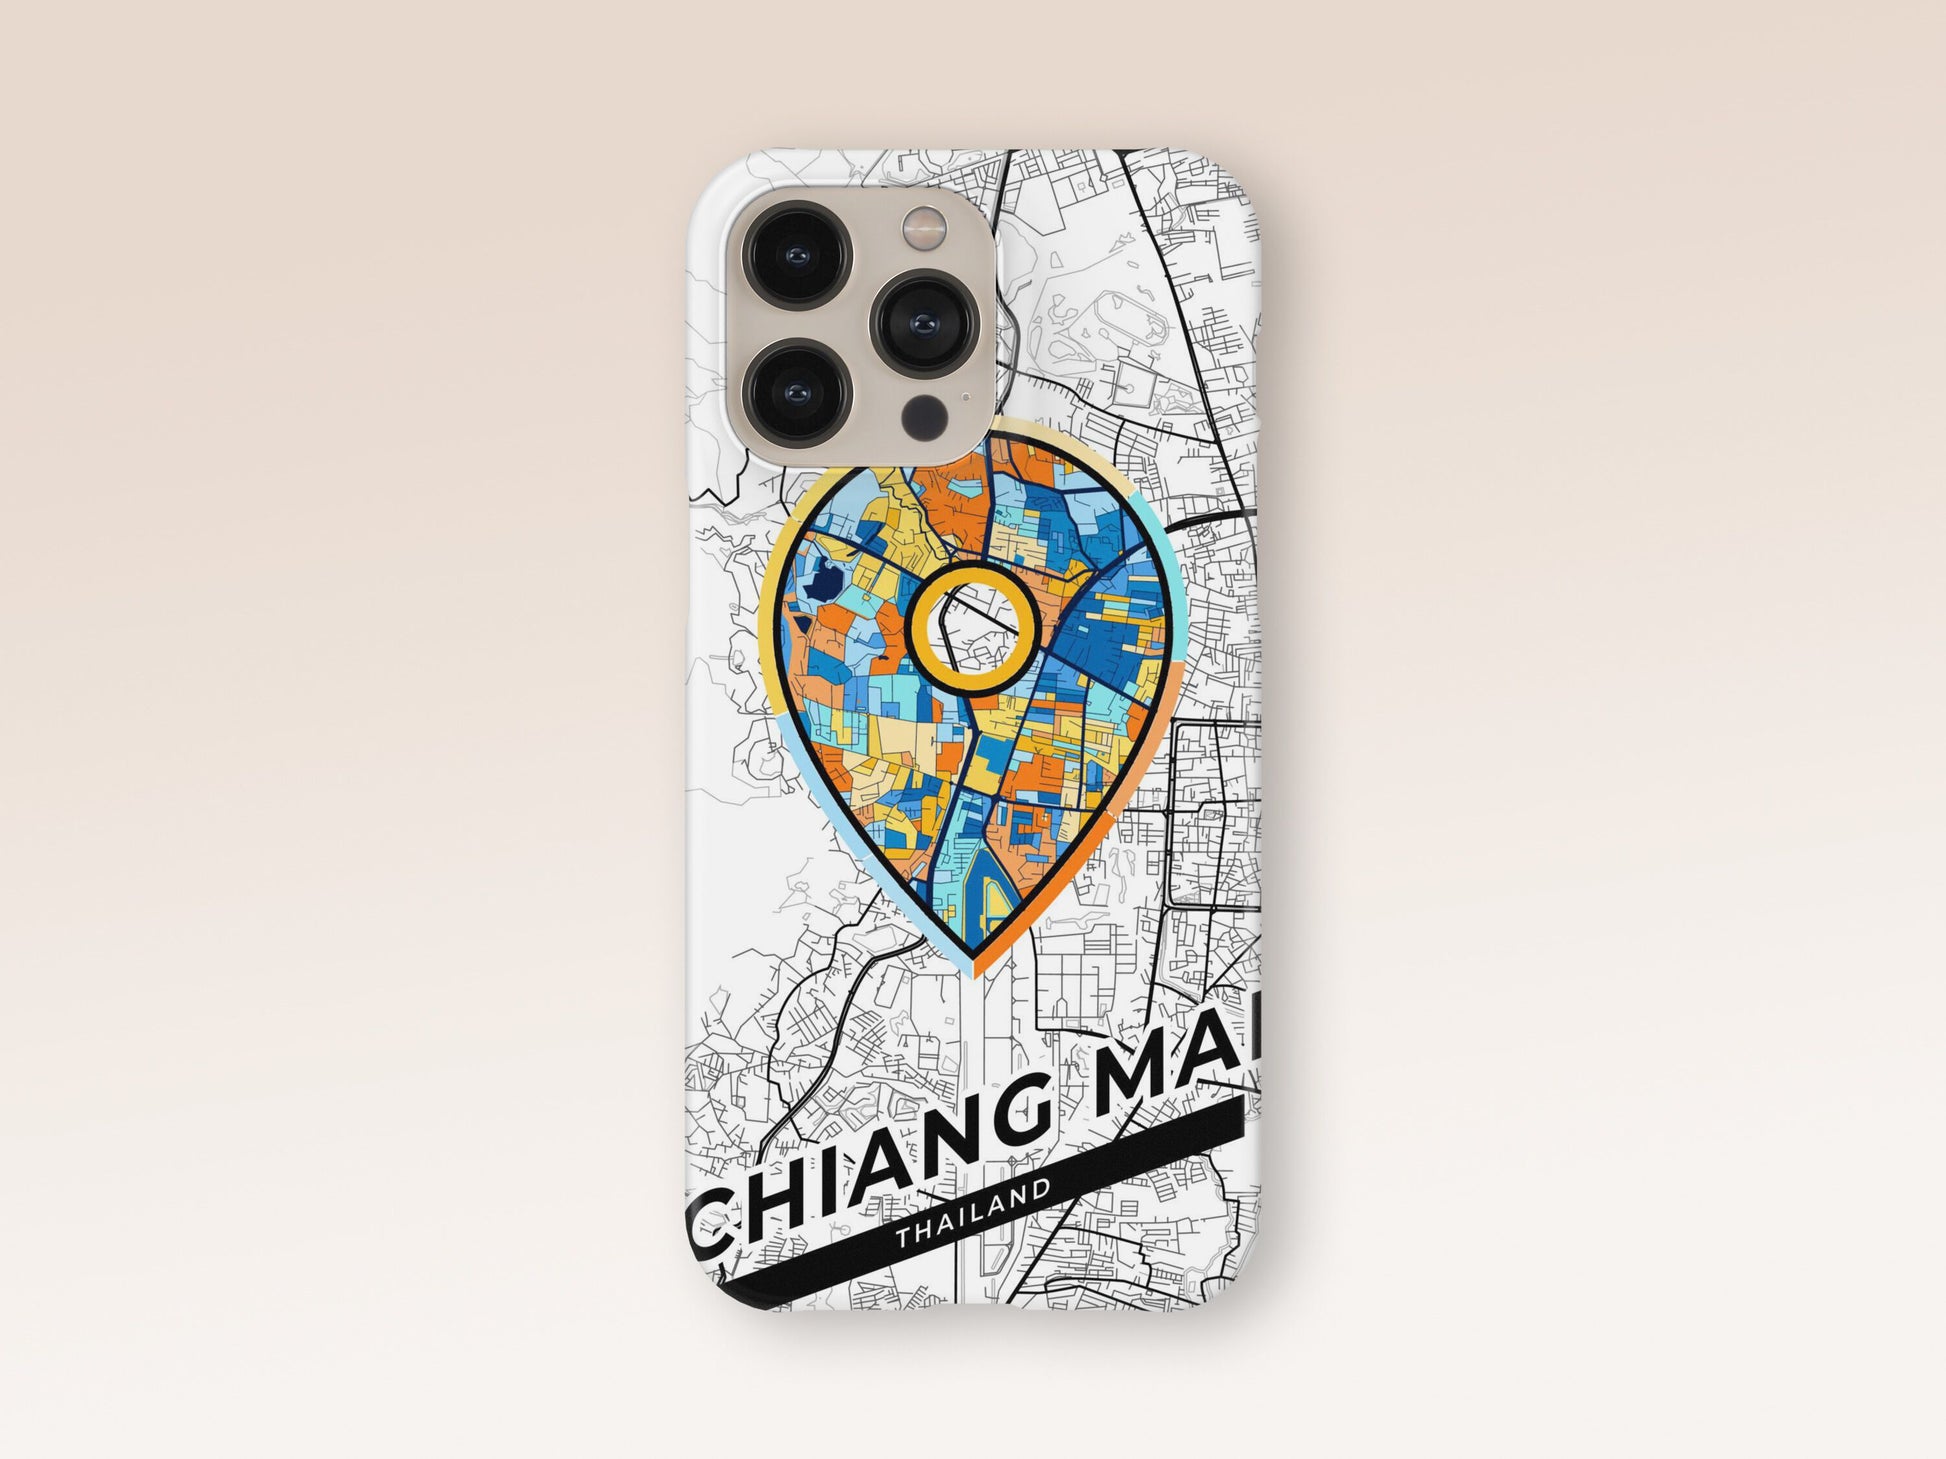 Chiang Mai Thailand slim phone case with colorful icon. Birthday, wedding or housewarming gift. Couple match cases. 1